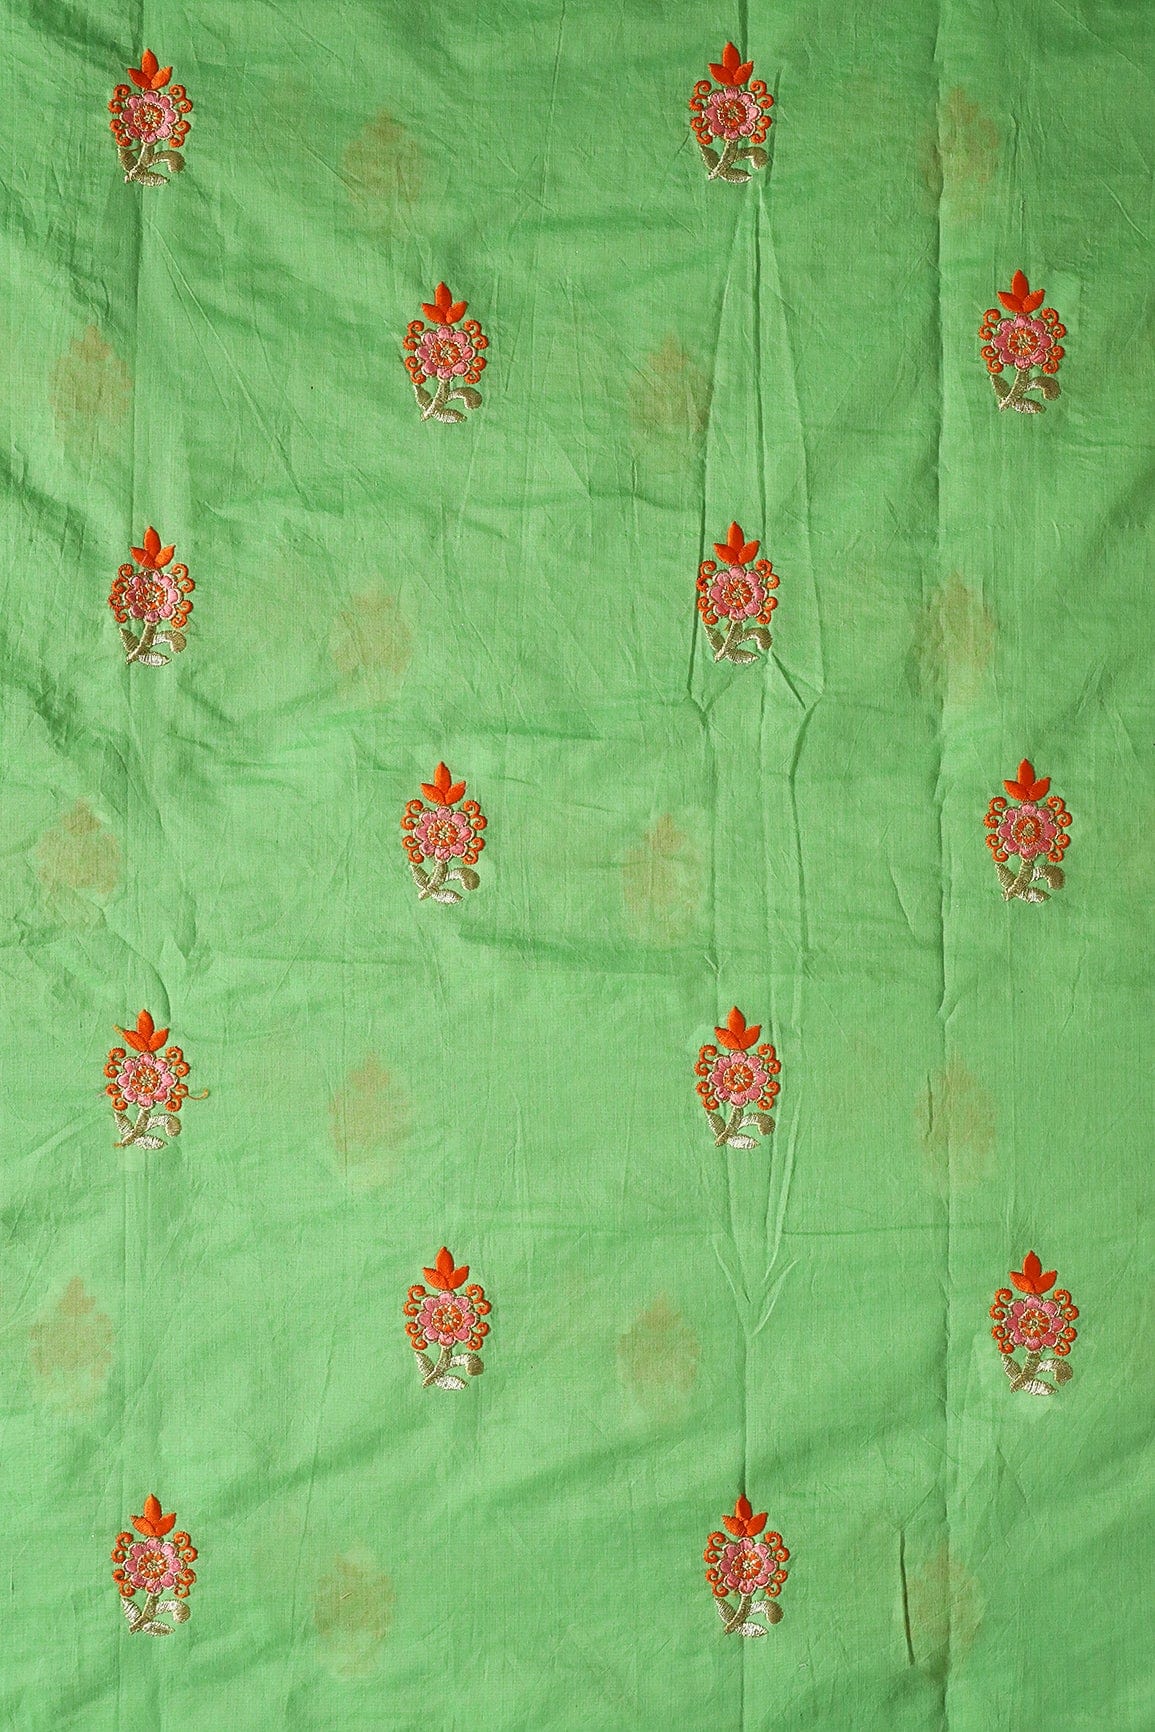 doeraa Embroidery Fabrics Orange And Pink Thread With Gold Zari Floral Embroidery On Green Chanderi Fabric